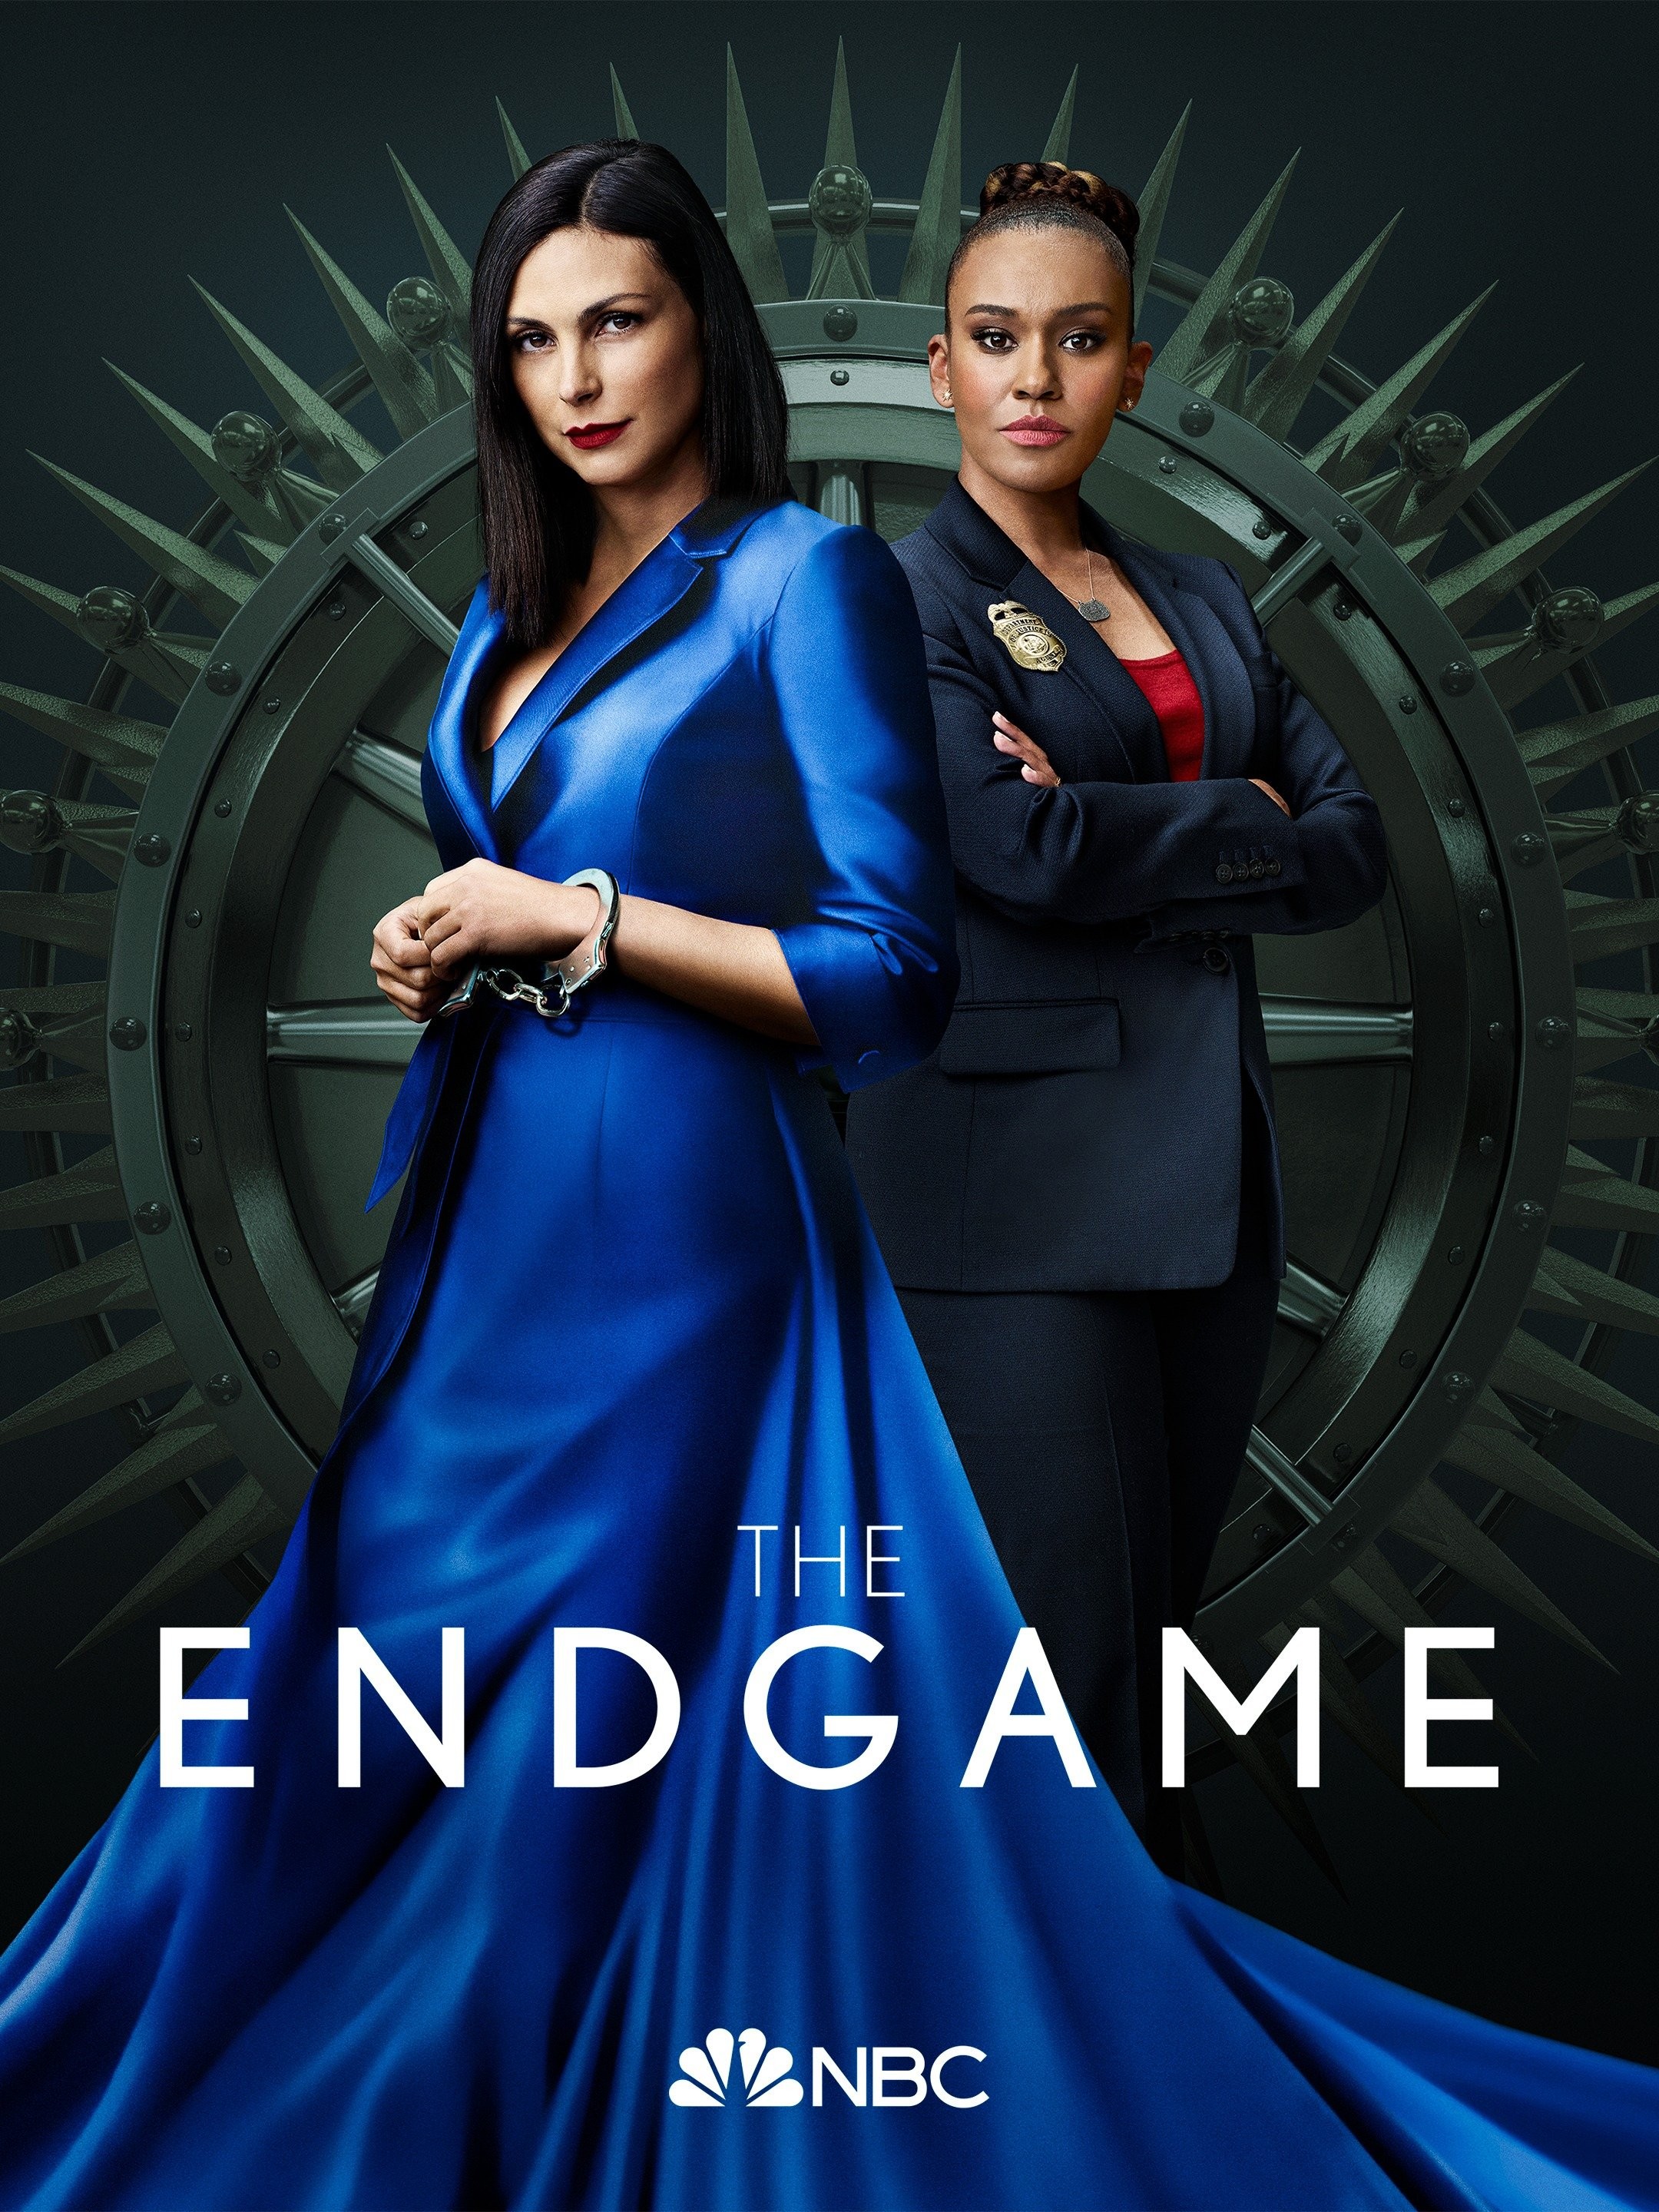 The Endgame: release date, cast, plot, trailer and more